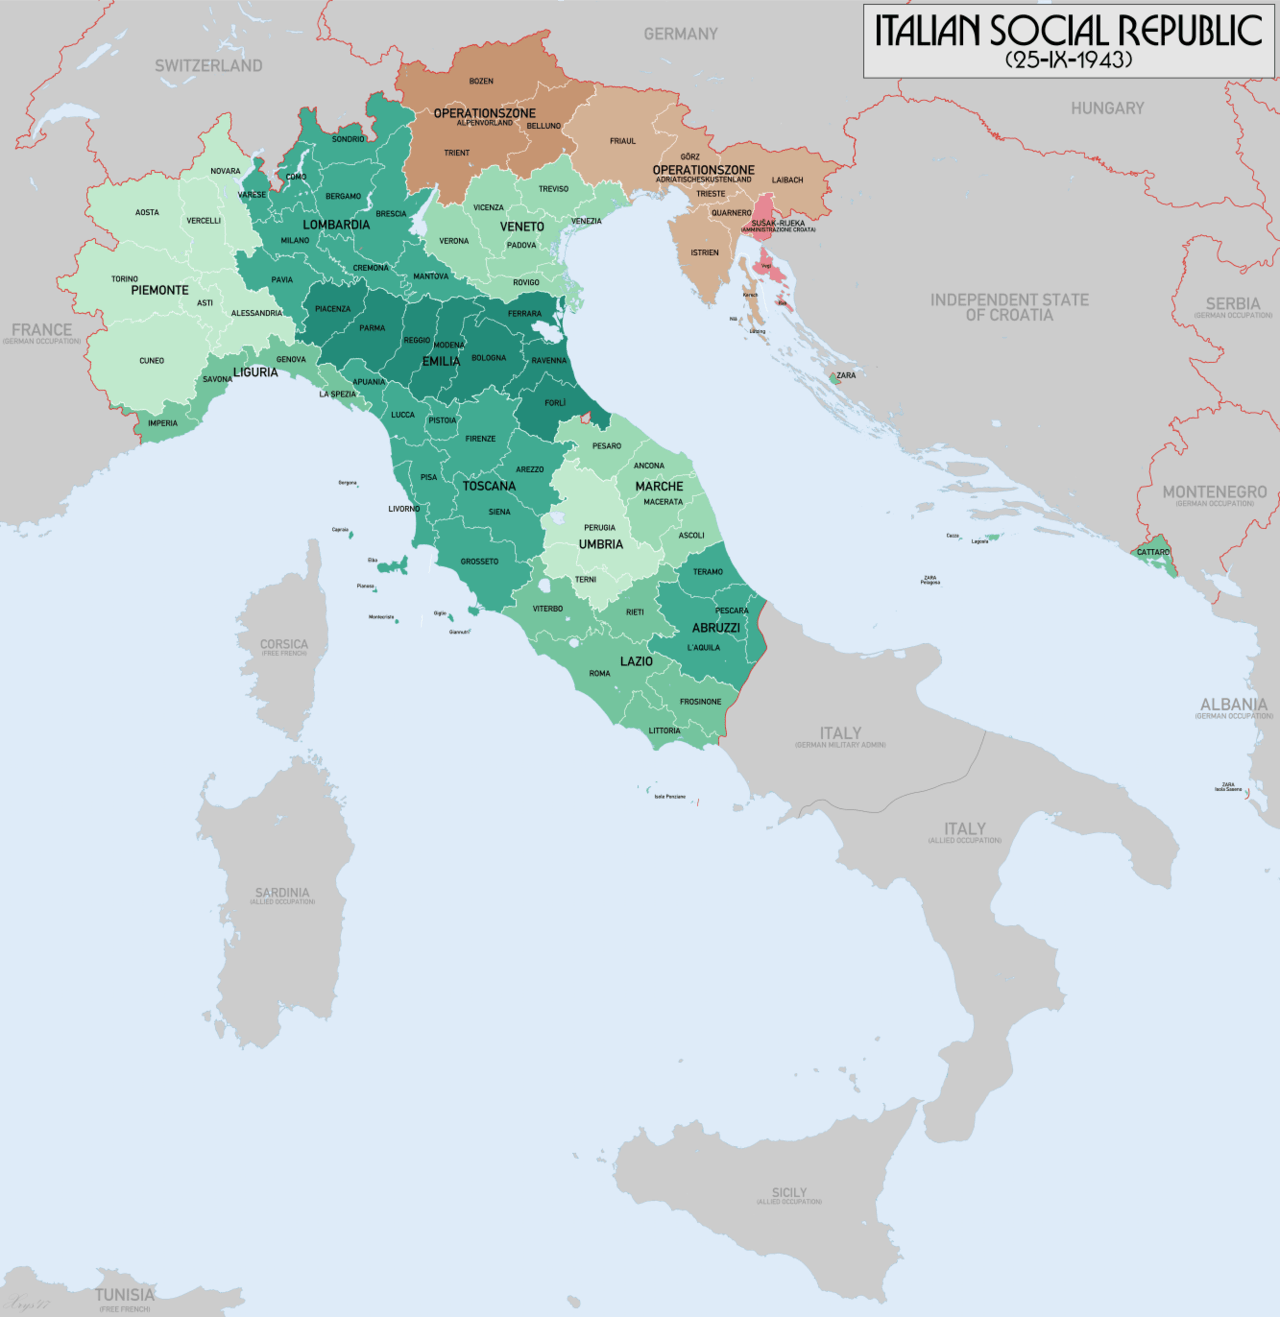 The Italian Social Republic, Nazi Germany's puppet state that existed from 1943-1945